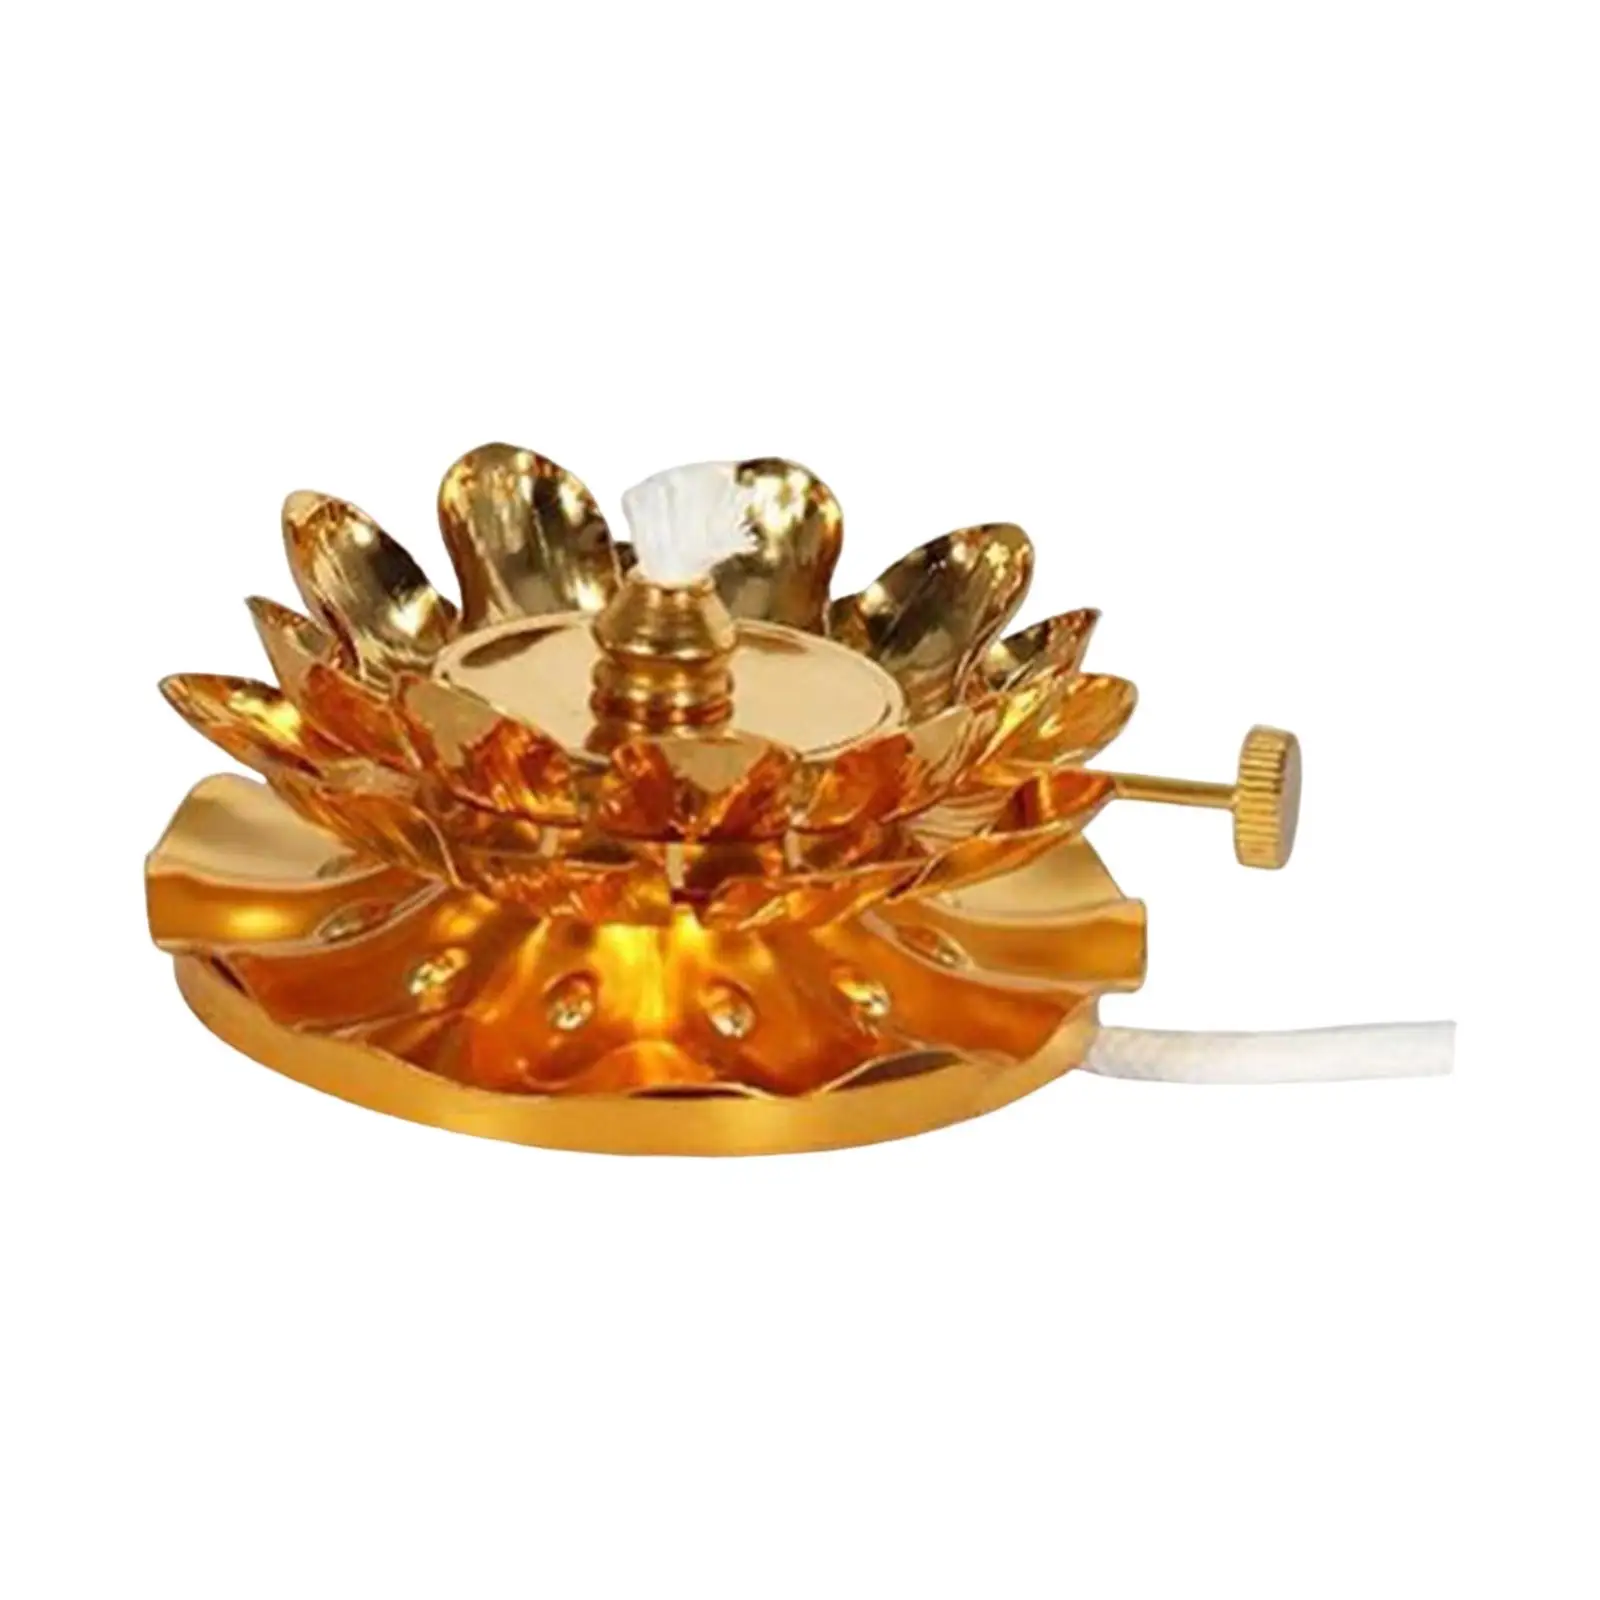 Vintage Style Butter Lamp Wick Holder Without Wick Lotus Flower Oil Lamp Holder Temple Rack Alloy Ornament Parts for Home Decor